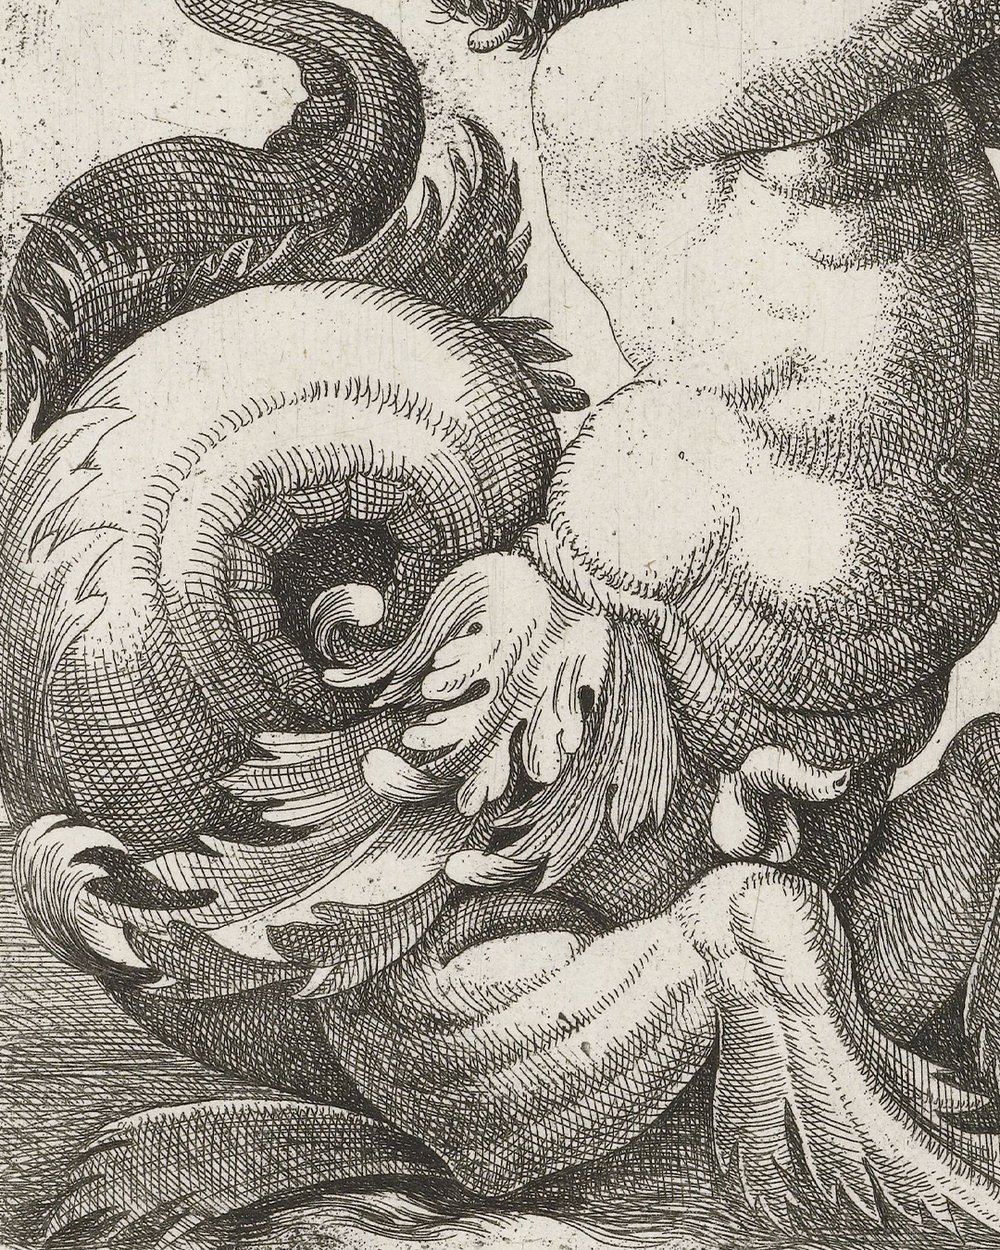 "Triton blowing on shell" (1580 - 1610)